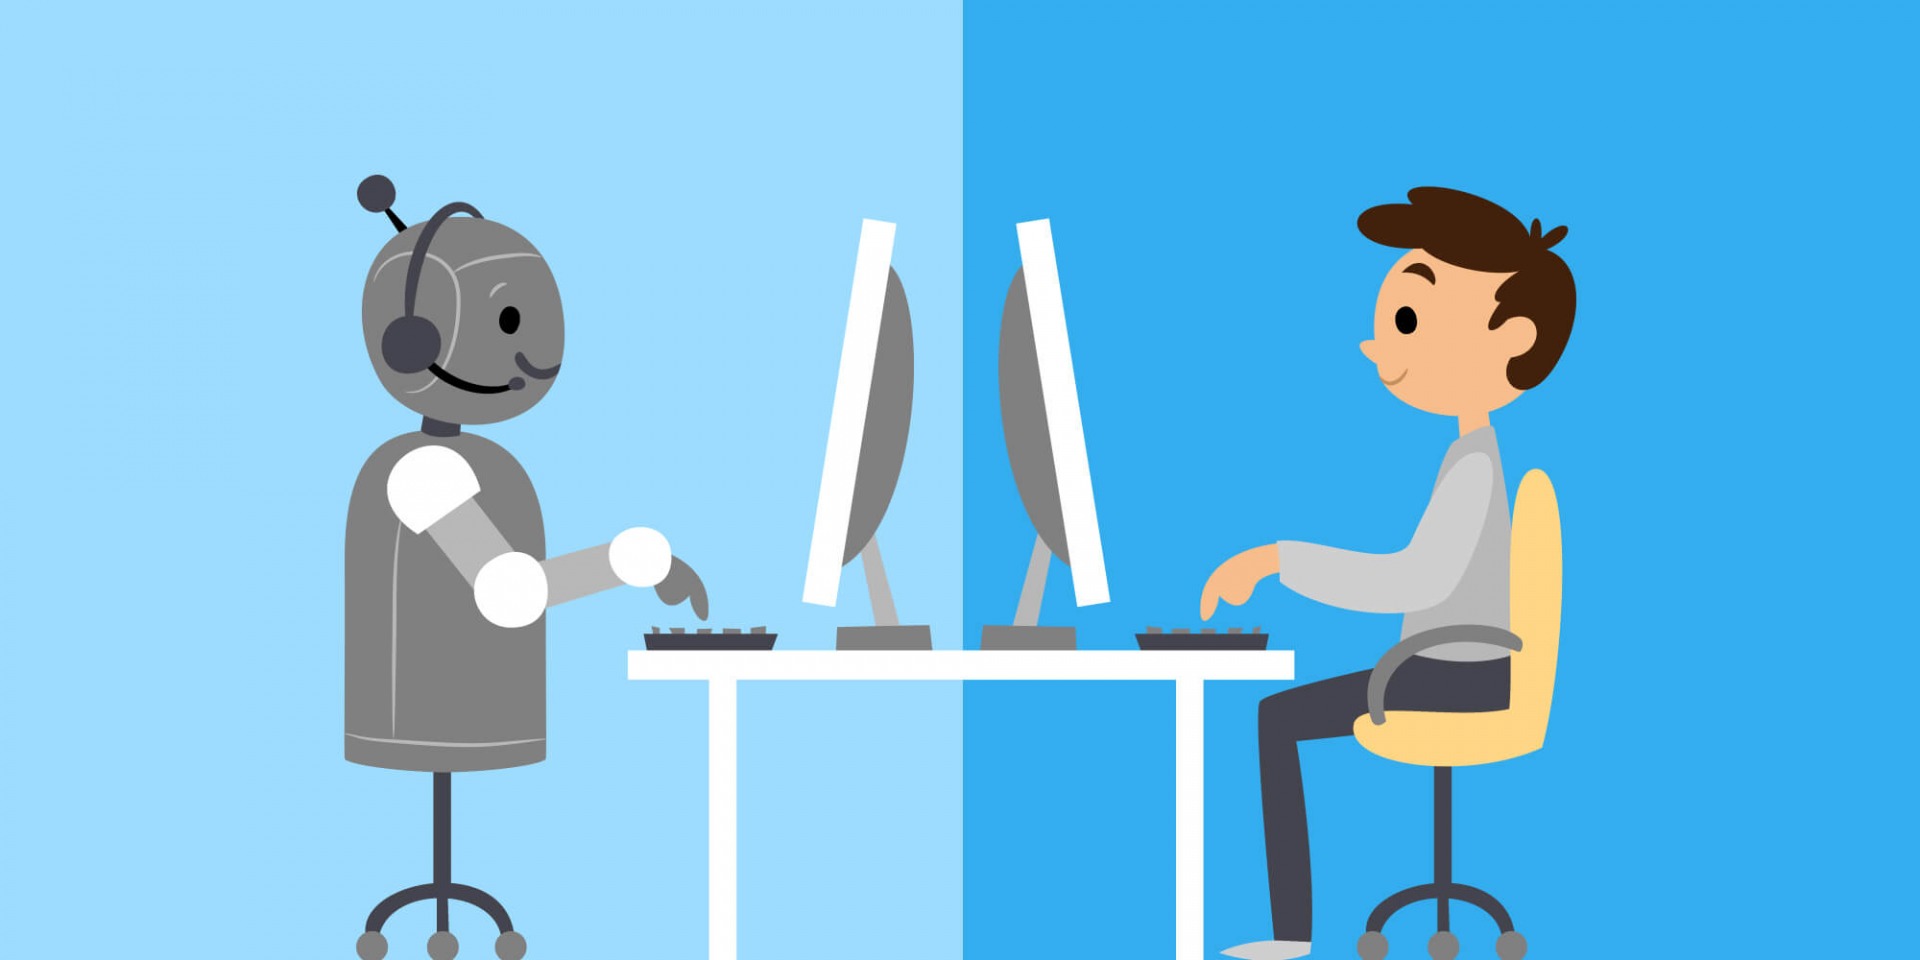 Digital Customer Service: ChatBots are to Quantity what Humans are to Quality